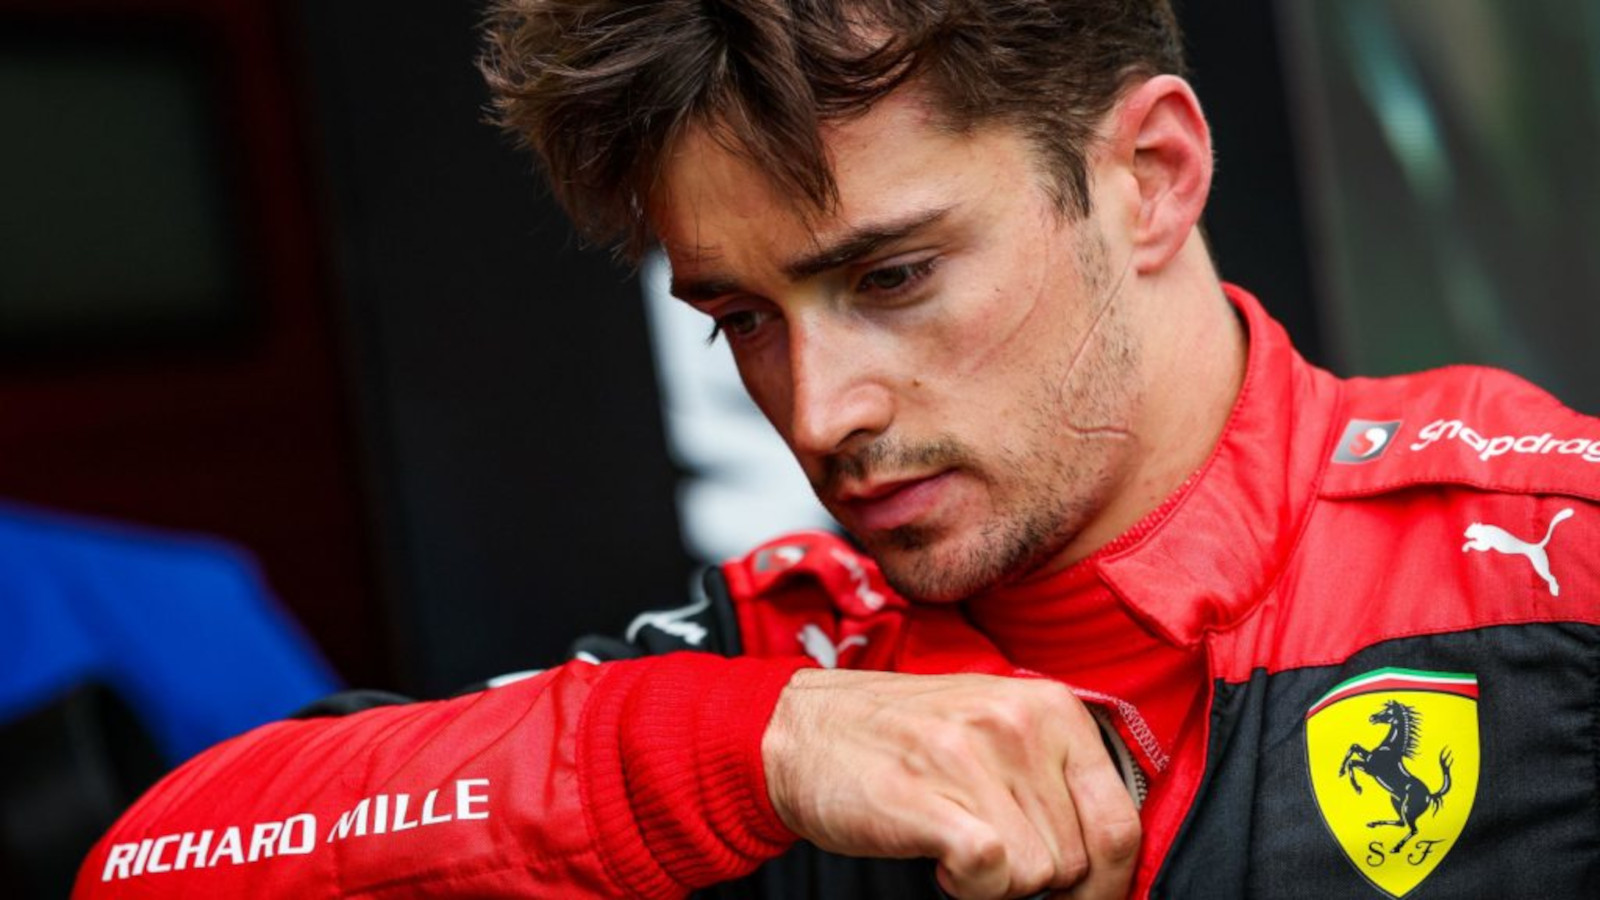 Charles Leclerc walking with his head down and disappointed after his mistake. Imola April 2022